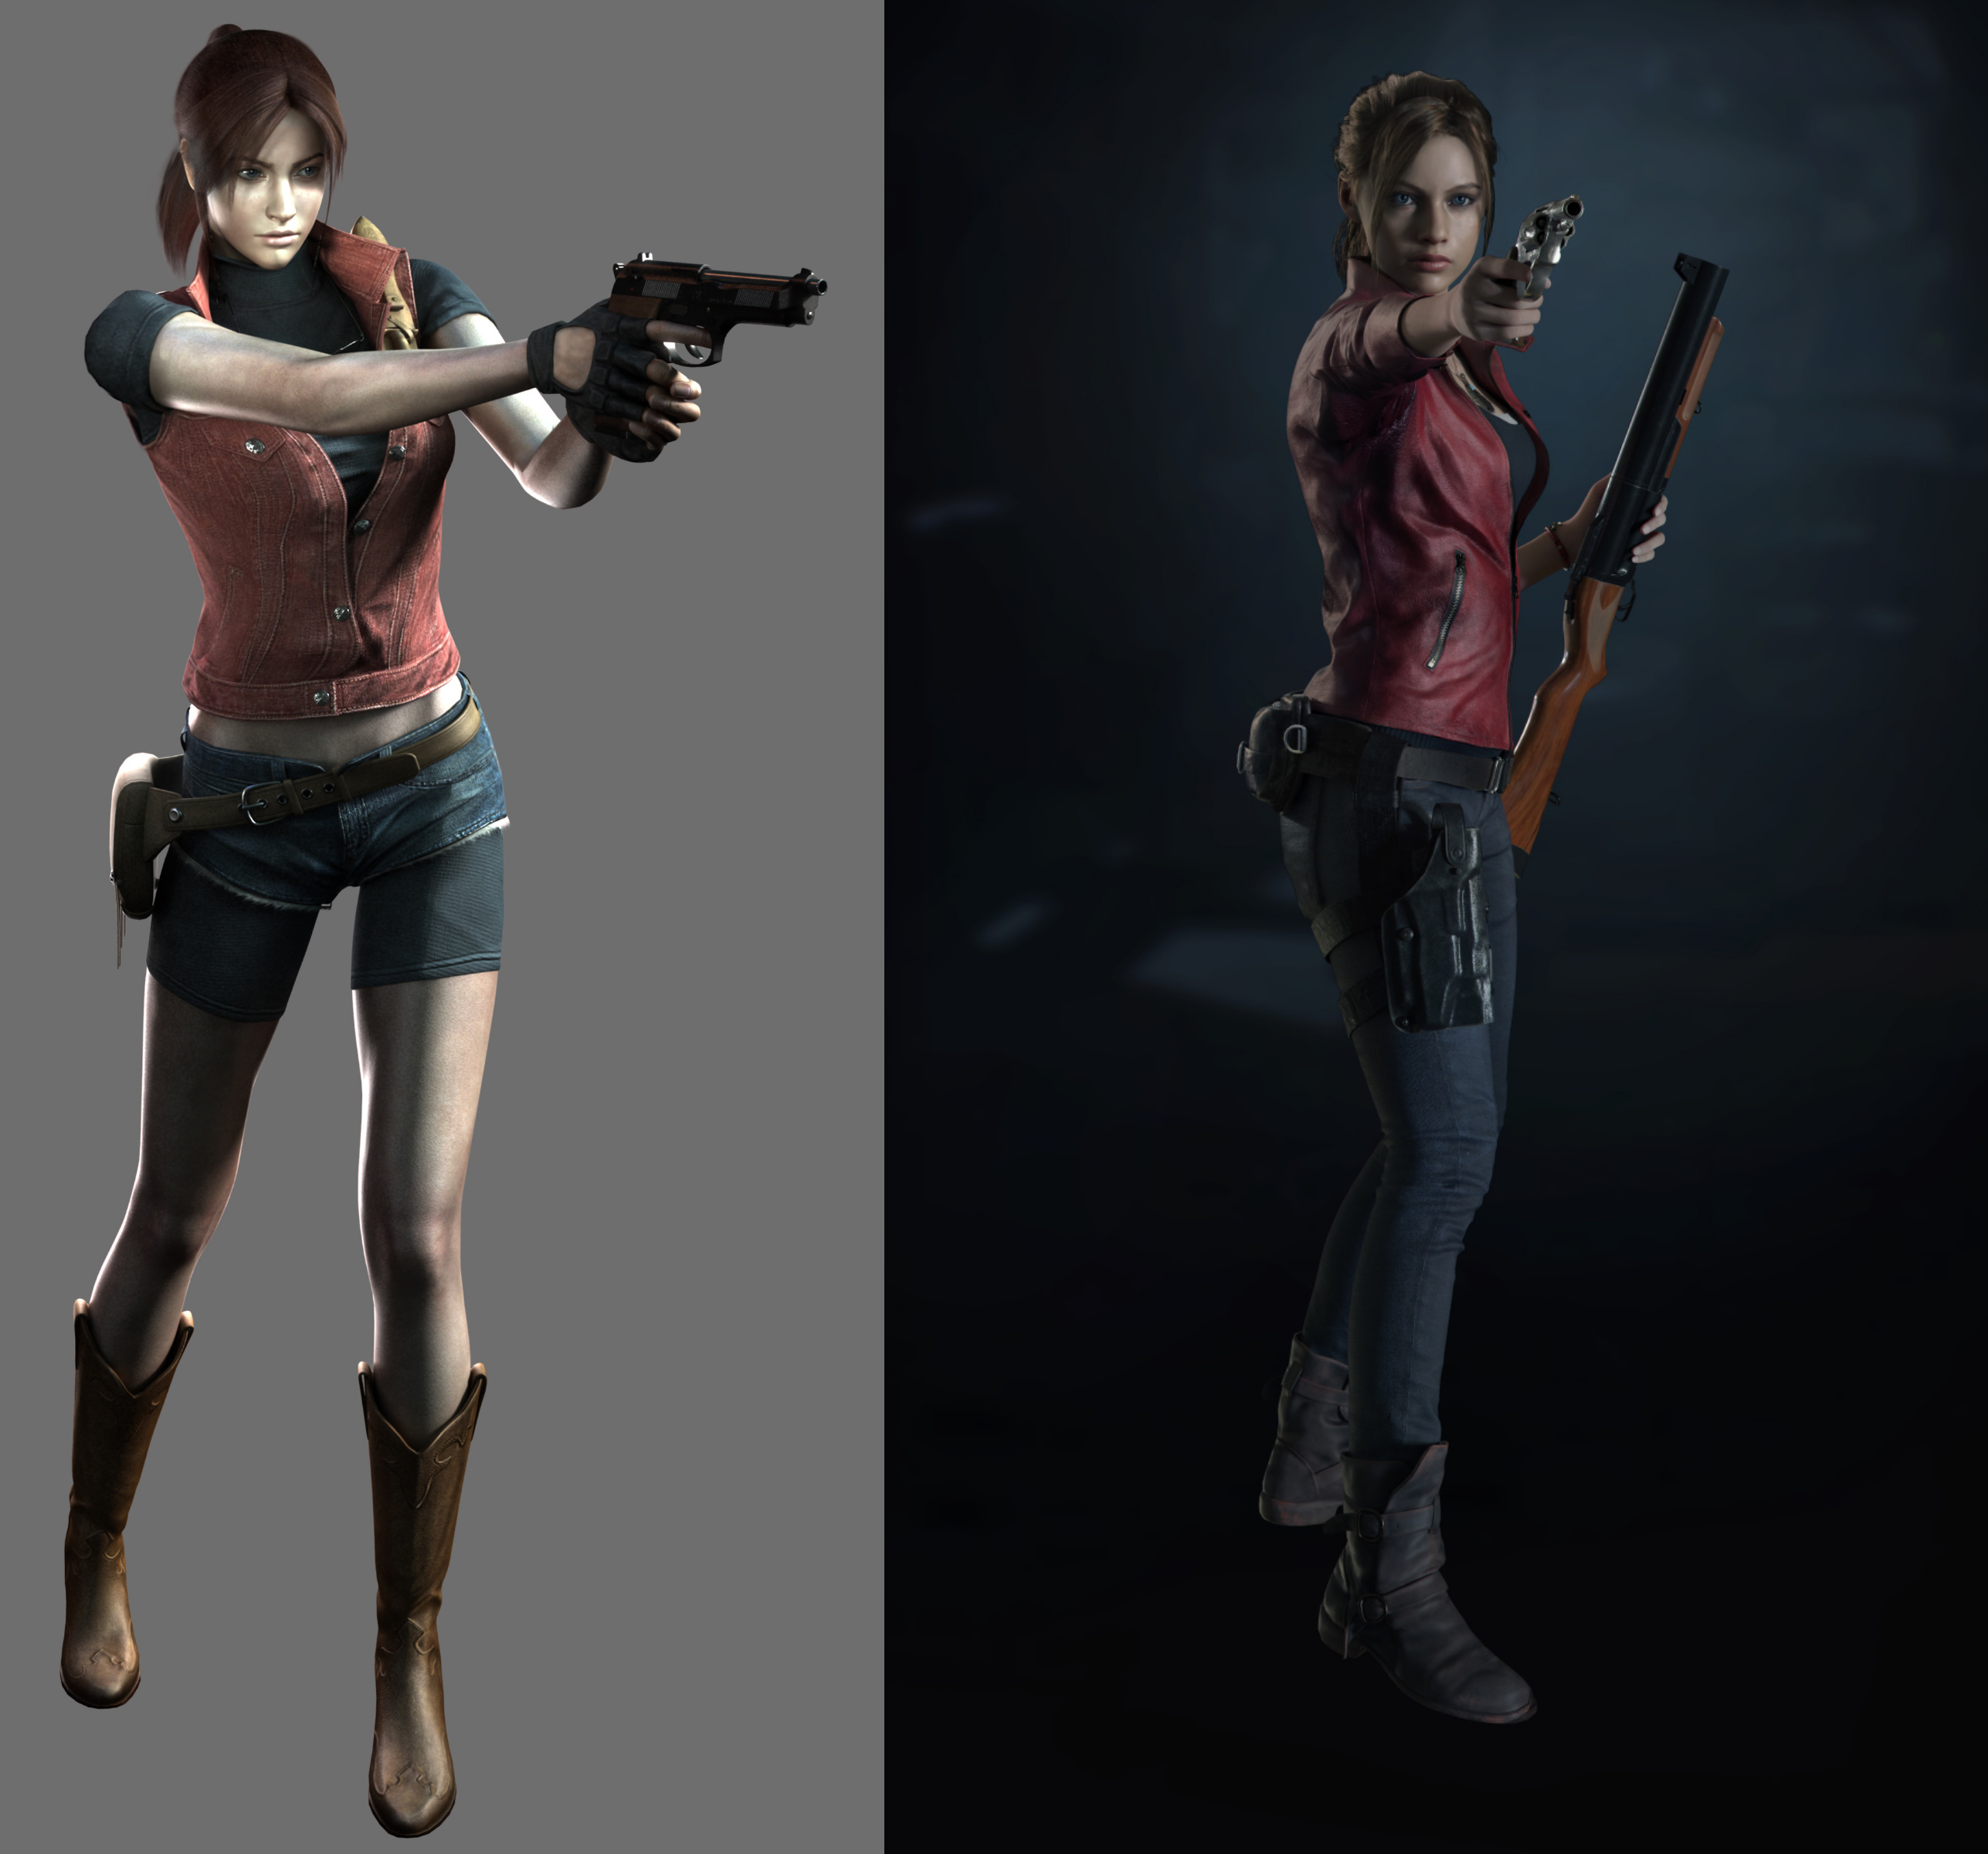 Claire Redfield went from wearing shorts and a T-shirt or this weird unitar...